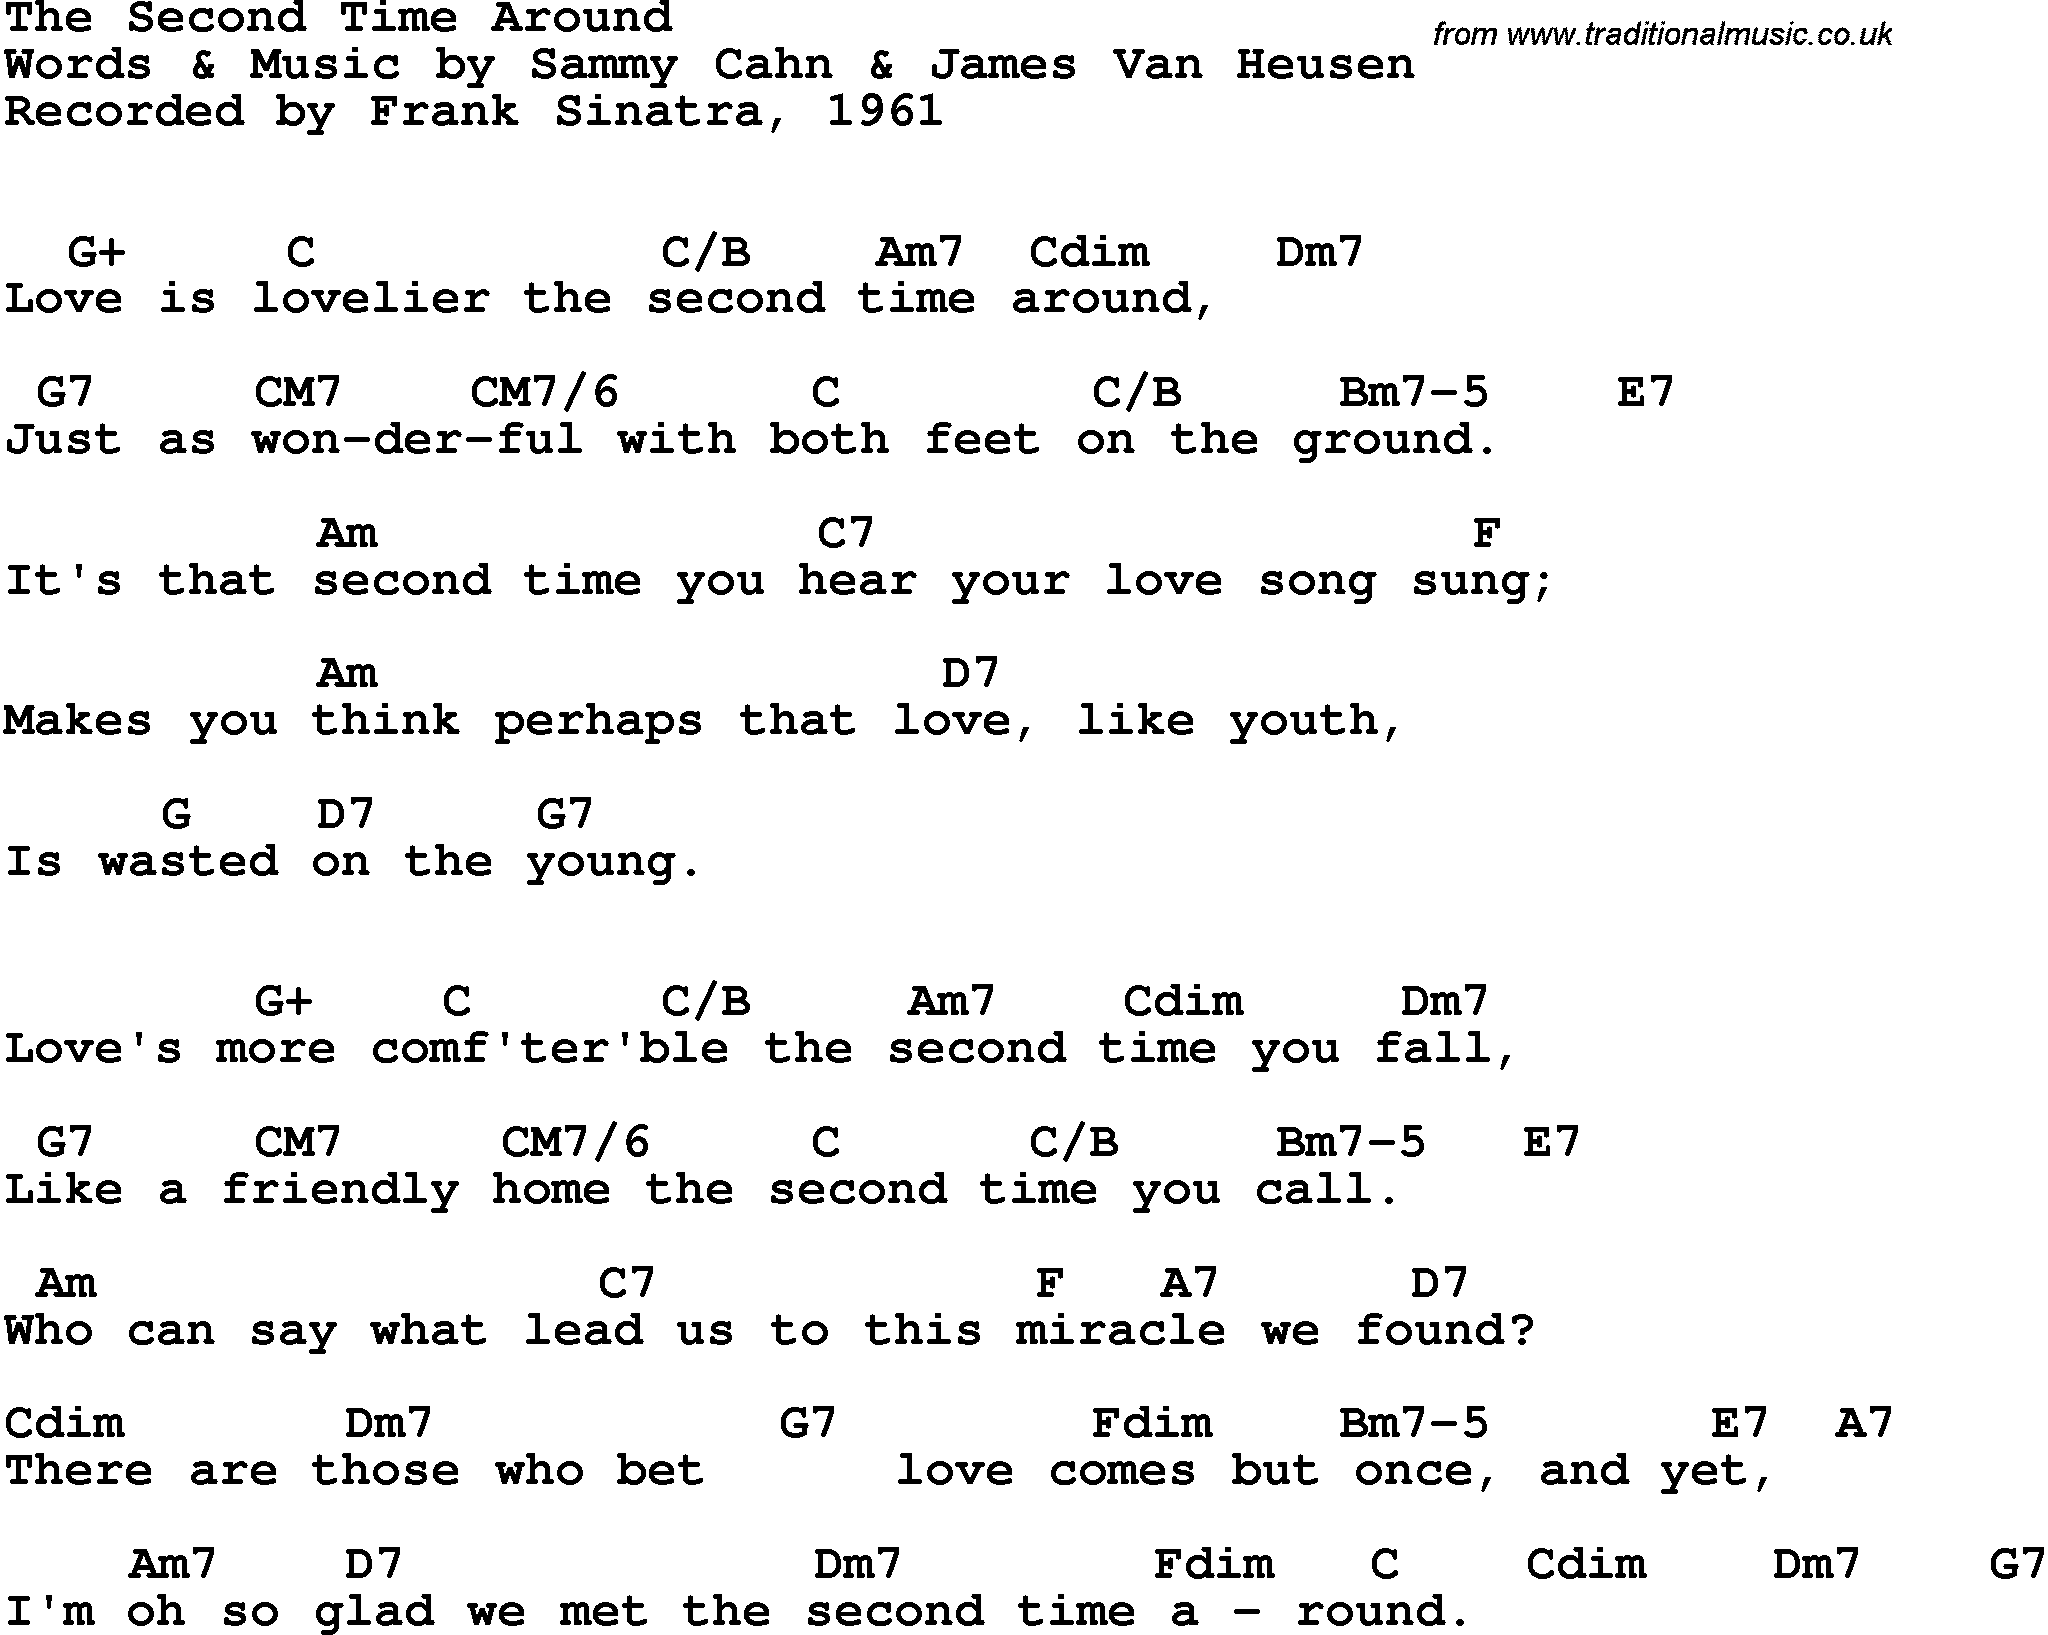 Song Lyrics with guitar chords for Second Time Around, The - Frank Sinatra, 1961